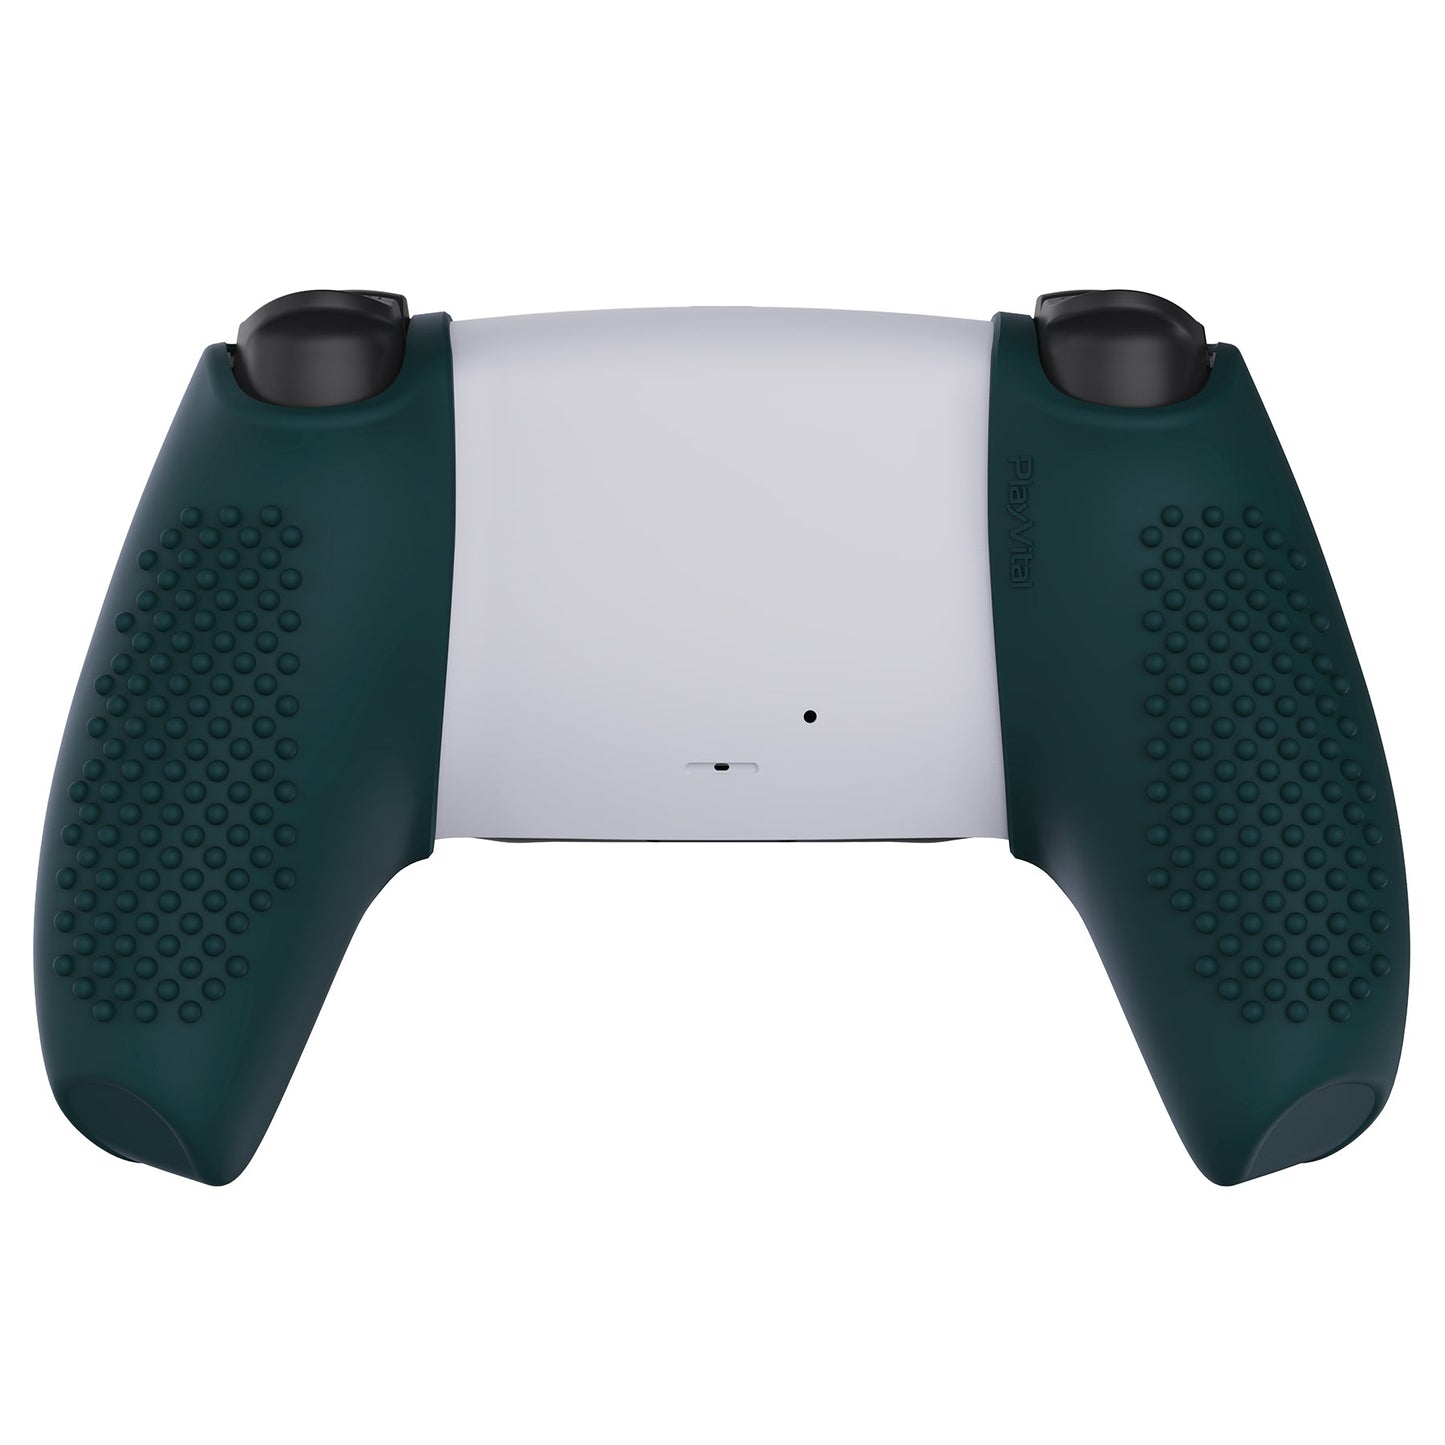 PlayVital 3D Studded Edition Racing Green Ergonomic Soft Controller Silicone Case Grips for PS5, Rubber Protector Skins with 6 Black Thumbstick Caps for PS5 Controller Compatible with Charging Station - TDPF018 PlayVital